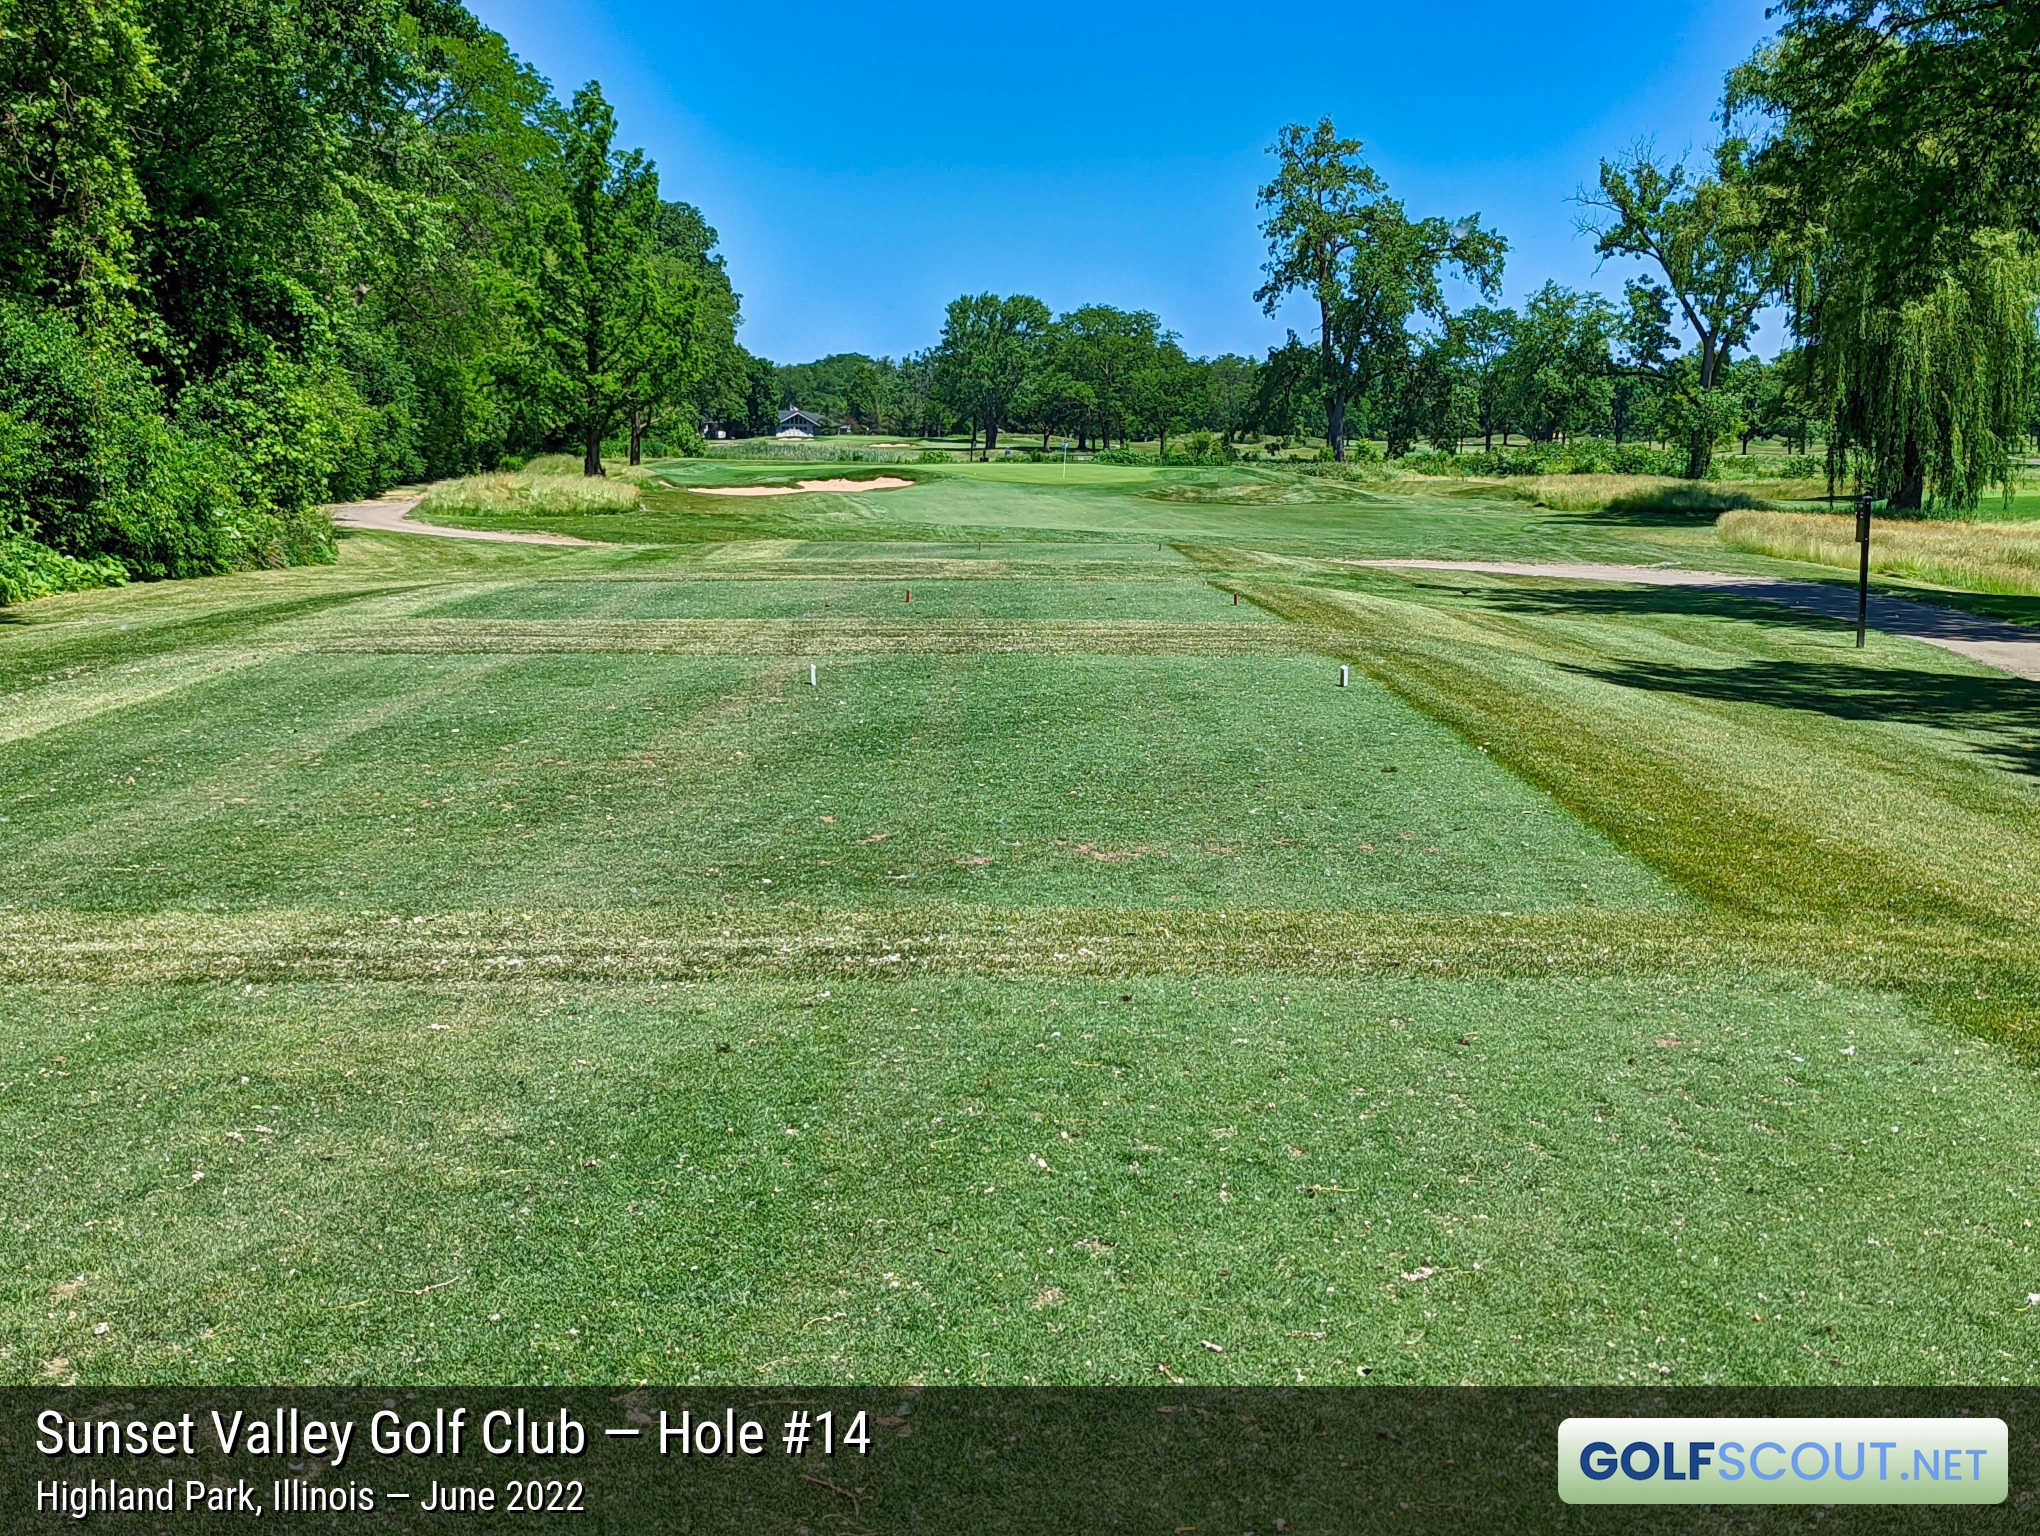 Photo of hole #14 at Sunset Valley Golf Club in Highland Park, Illinois. 